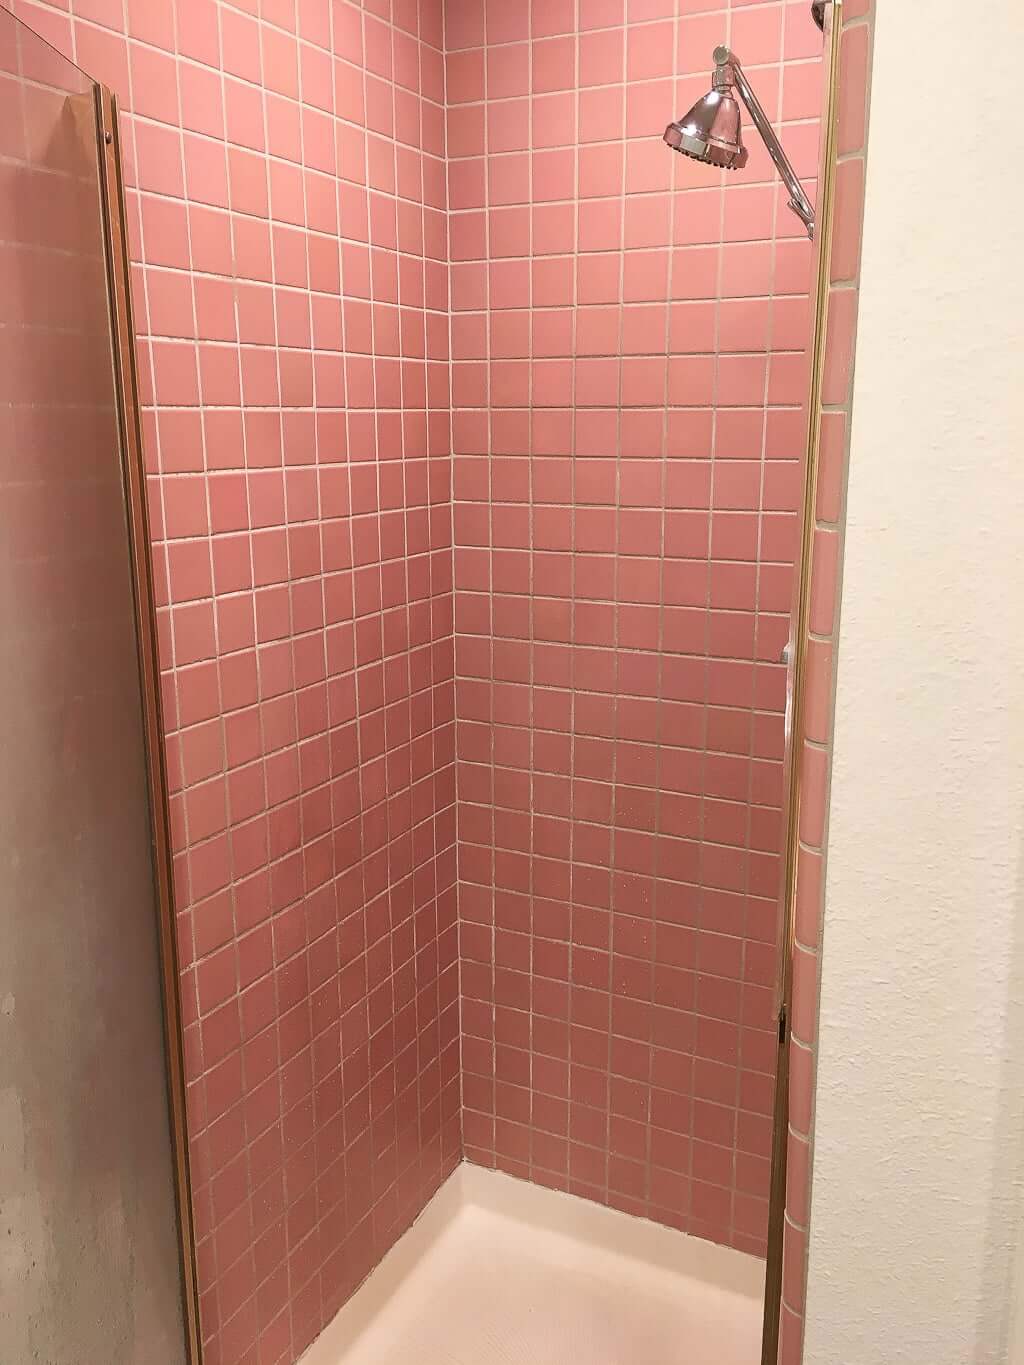 narrow bathroom shower with showerhead and pink tile